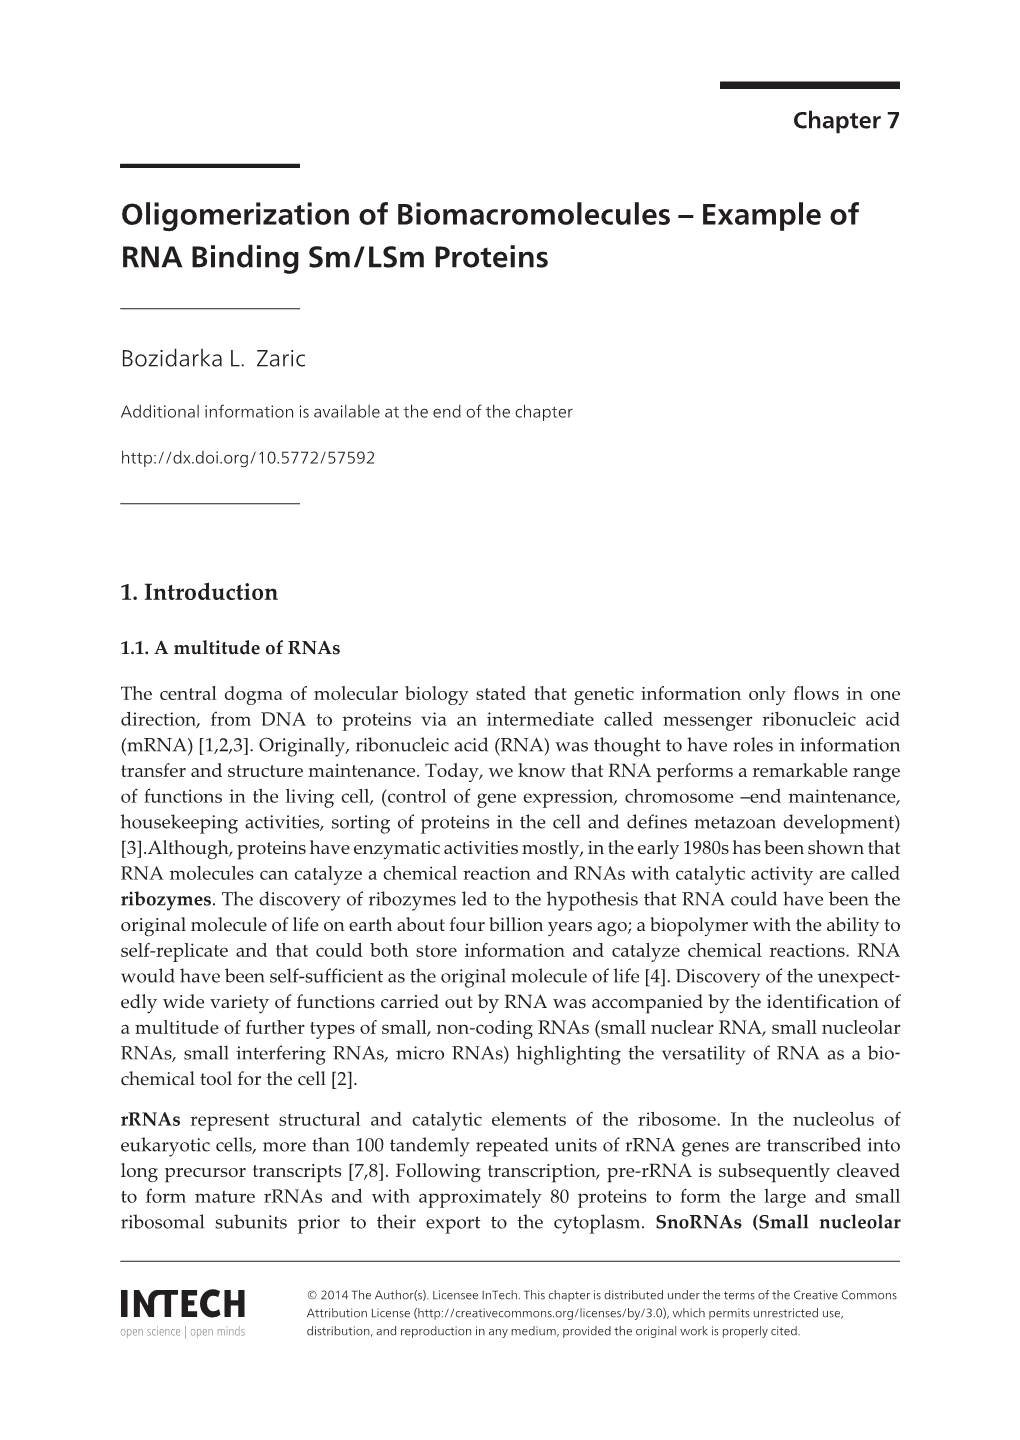 Example of RNA Binding Sm/Lsm Proteins